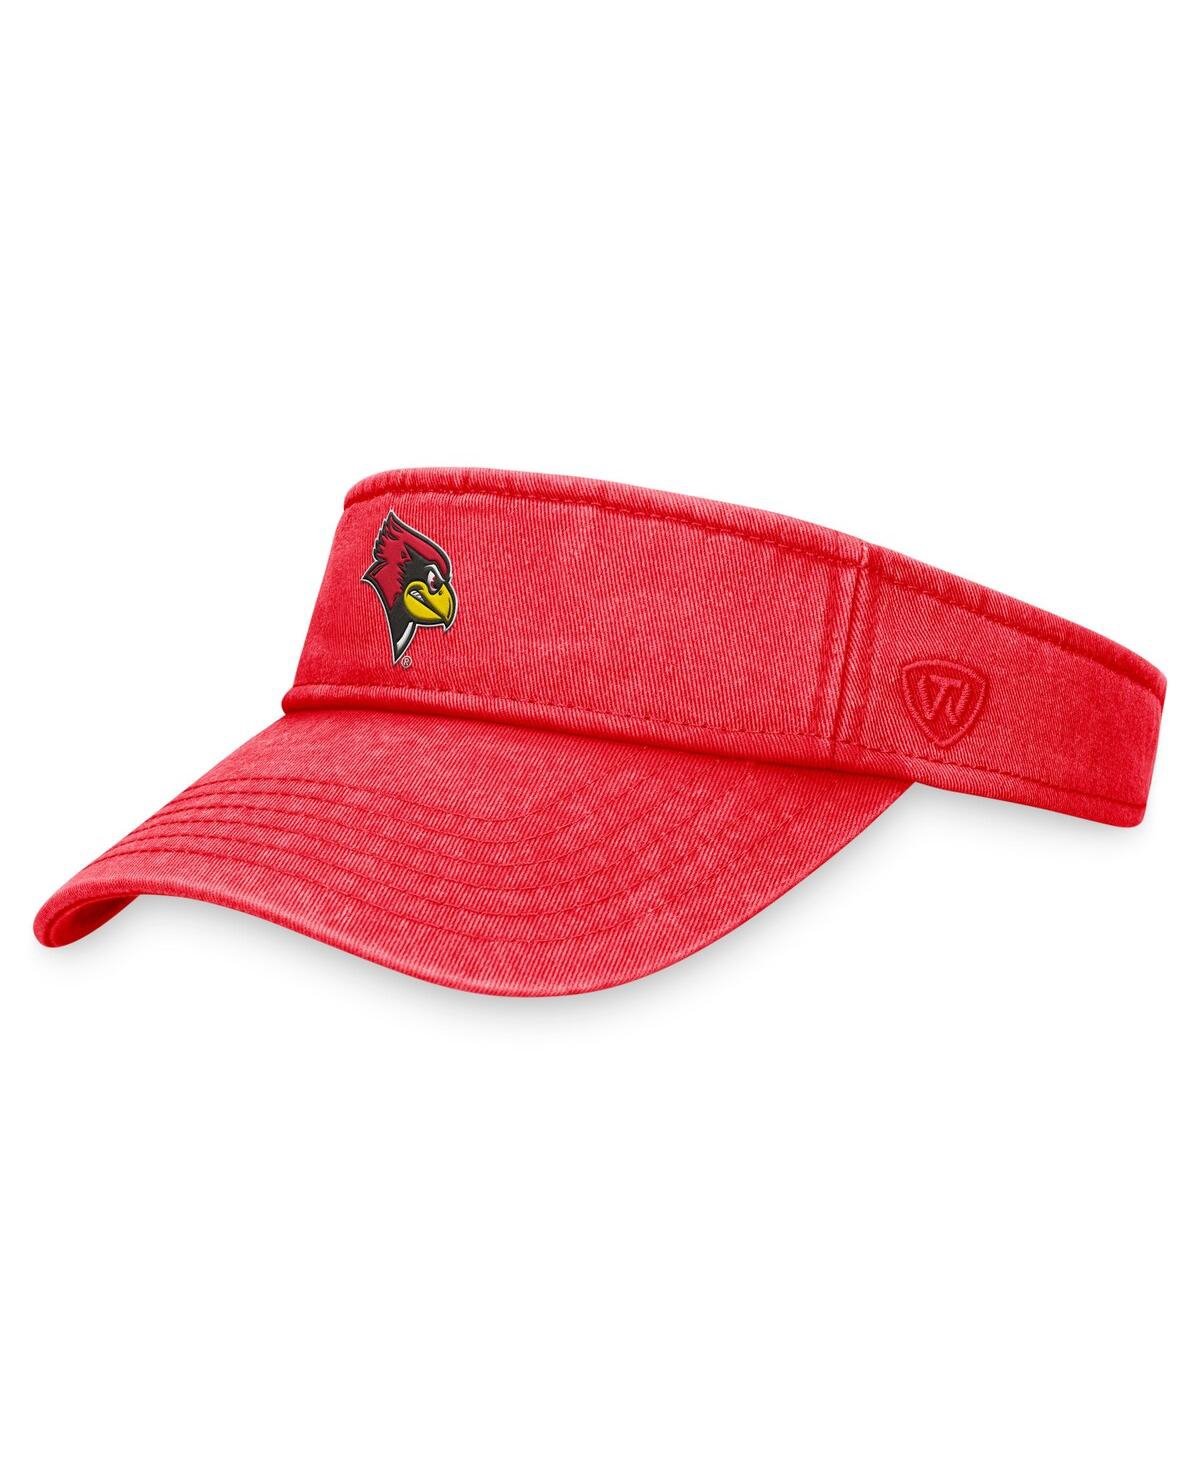 Men's Top of the World Red Illinois State Redbirds Terry Adjustable Visor - Red